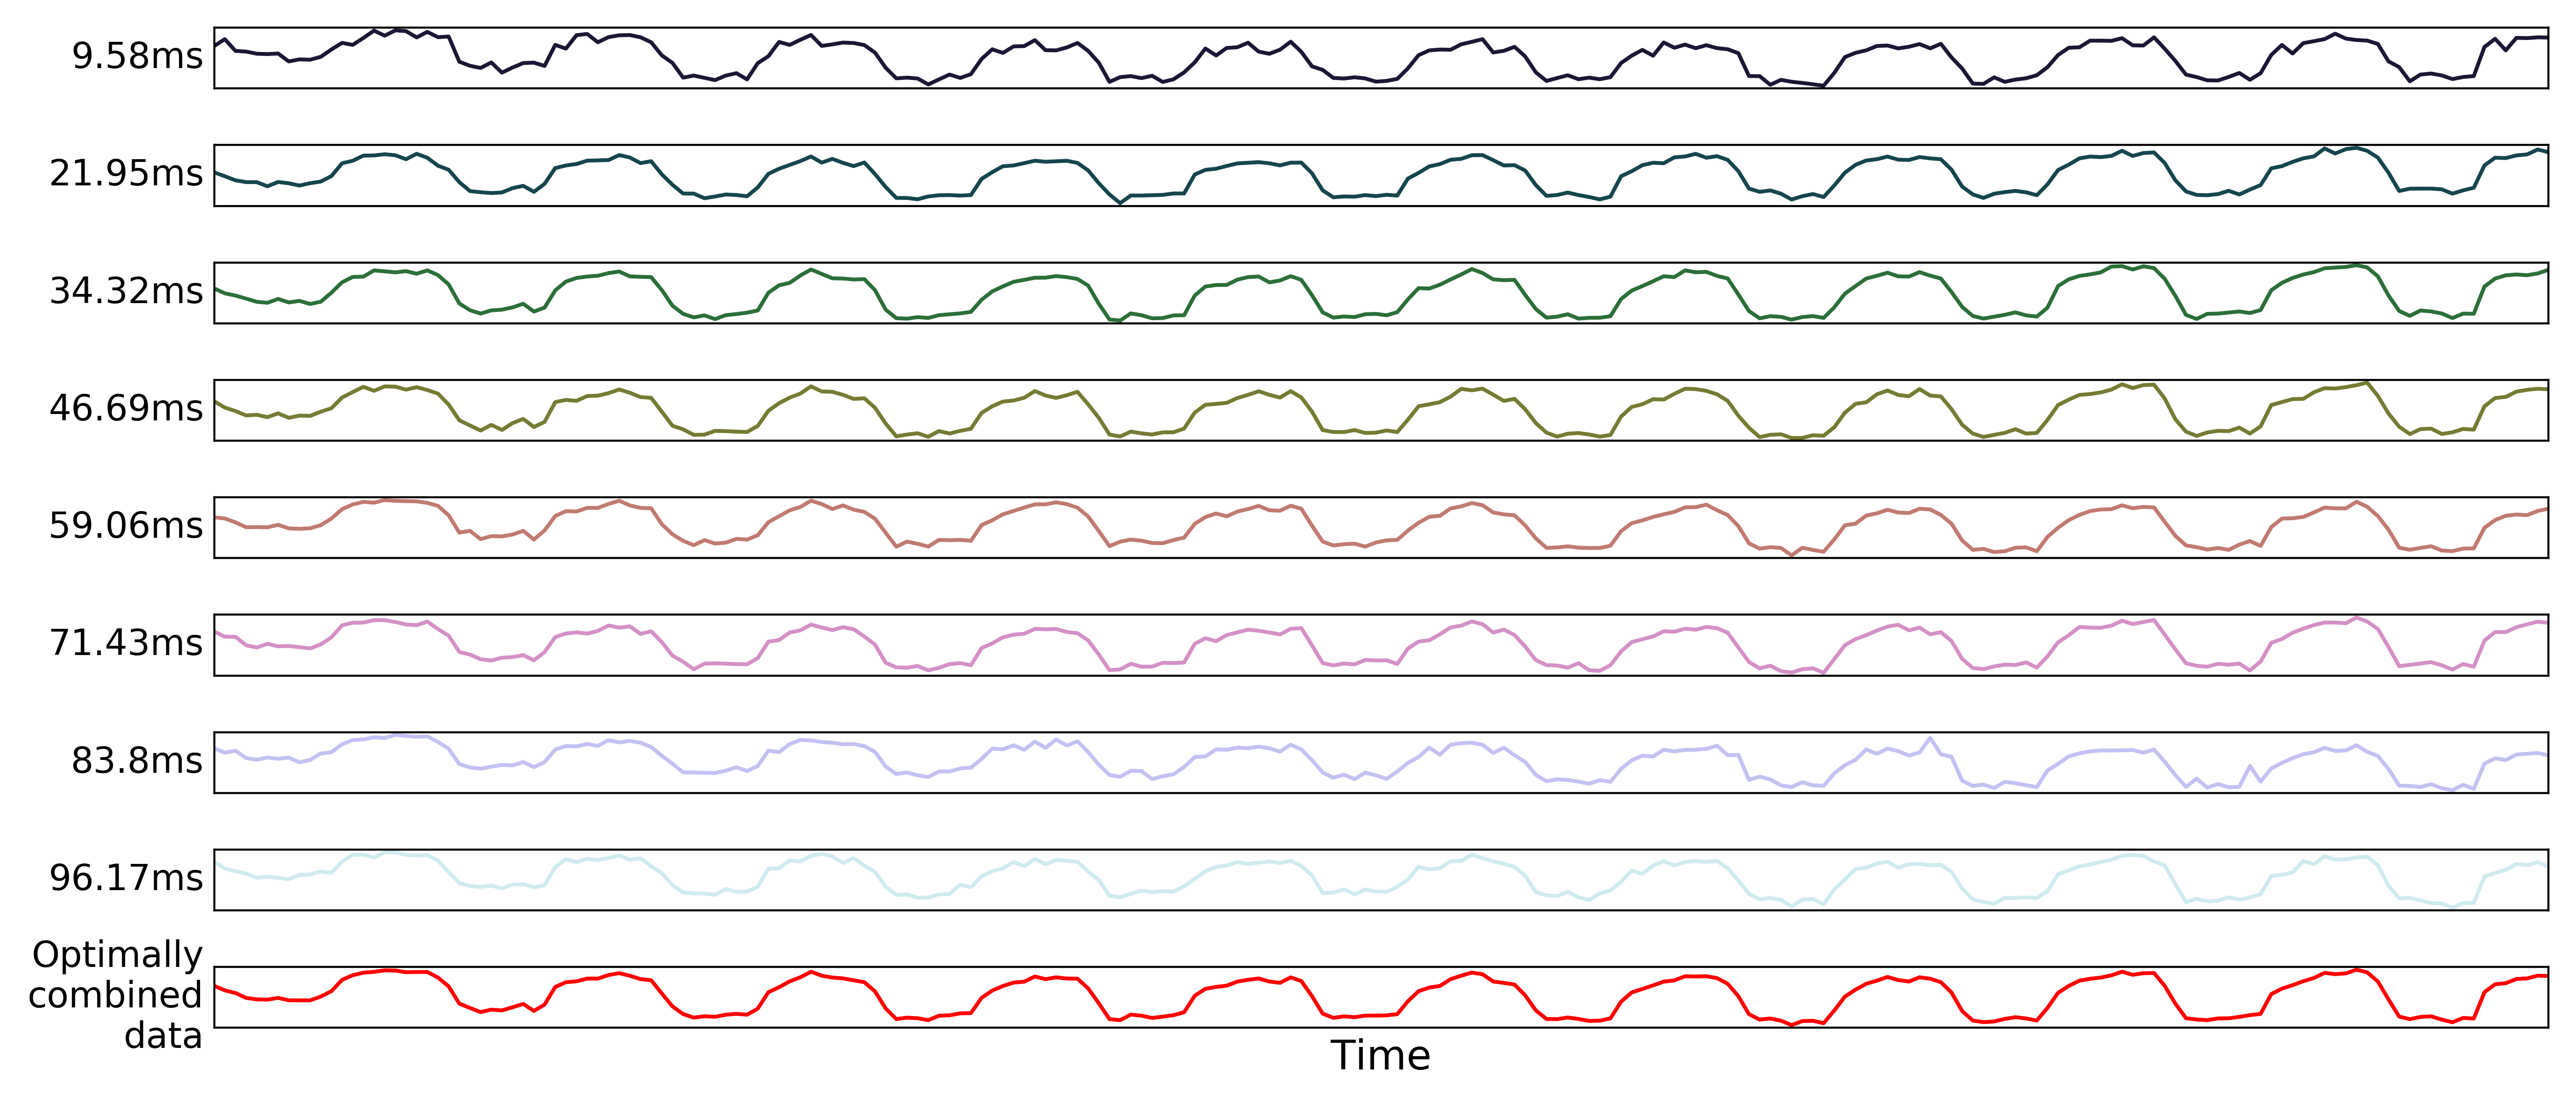 _images/a10_optimal_combination_timeseries.png